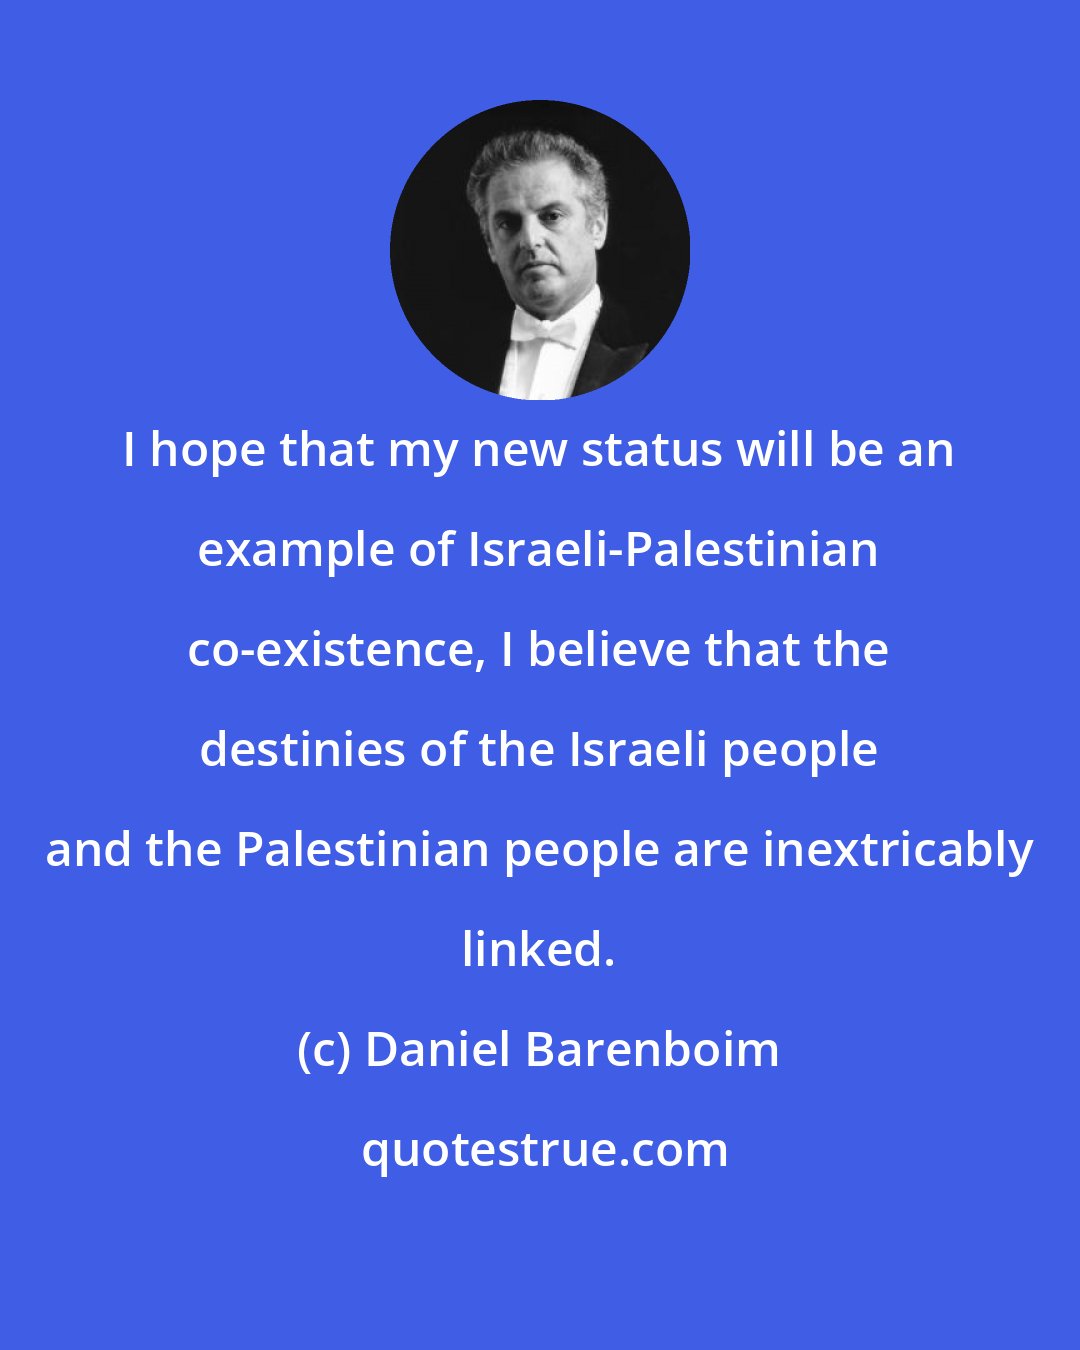 Daniel Barenboim: I hope that my new status will be an example of Israeli-Palestinian co-existence, I believe that the destinies of the Israeli people and the Palestinian people are inextricably linked.